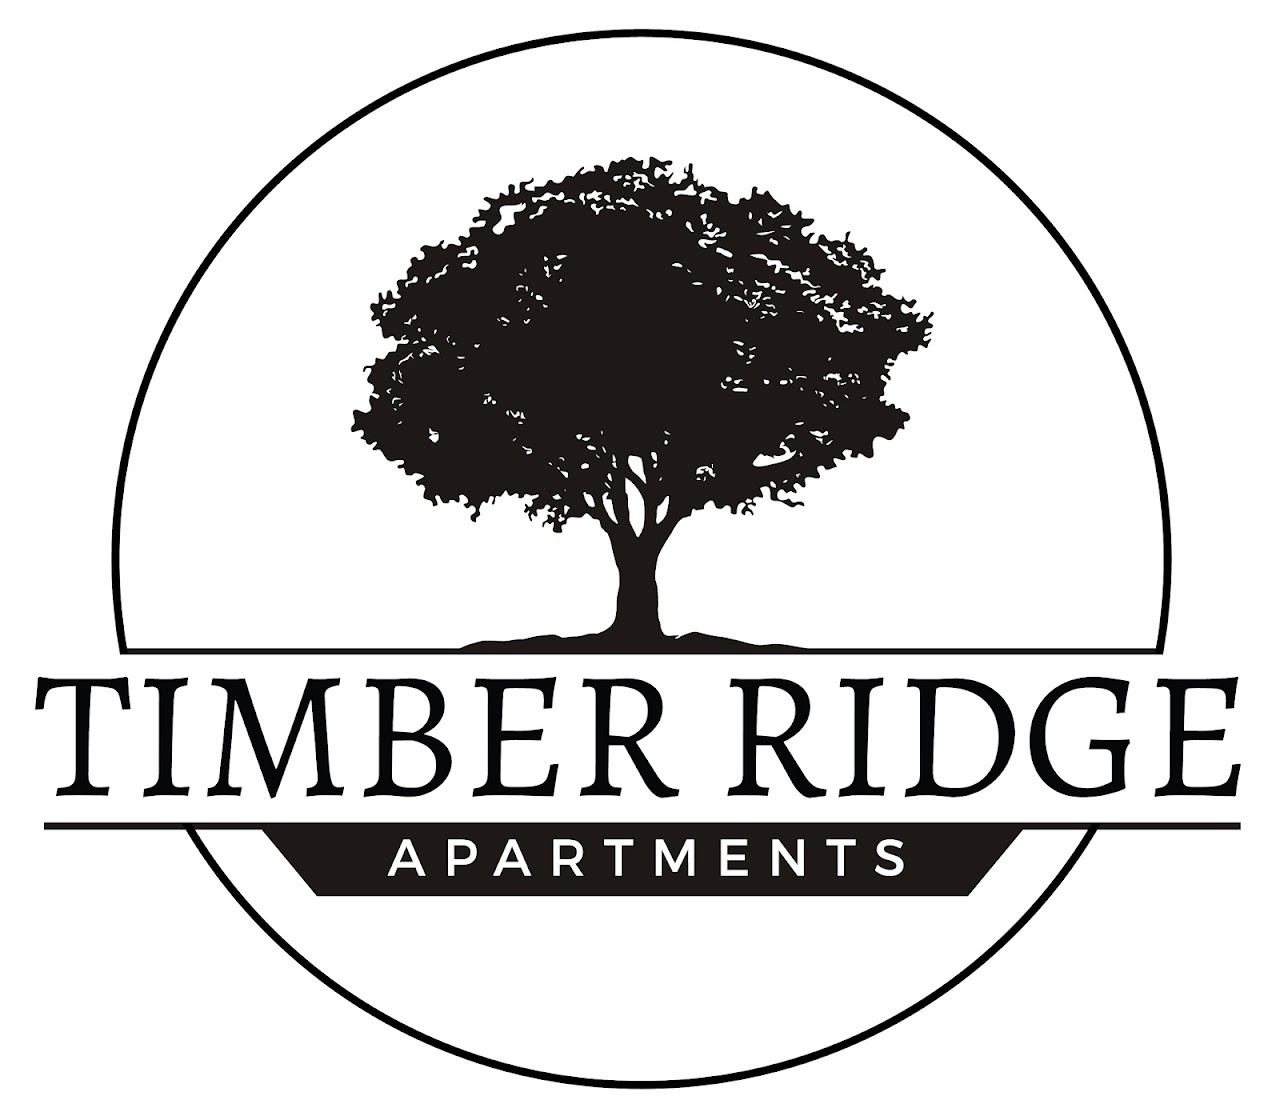 Photo of TIMBER RIDGE. Affordable housing located at 551 WILSON ST DURANT, OK 74701